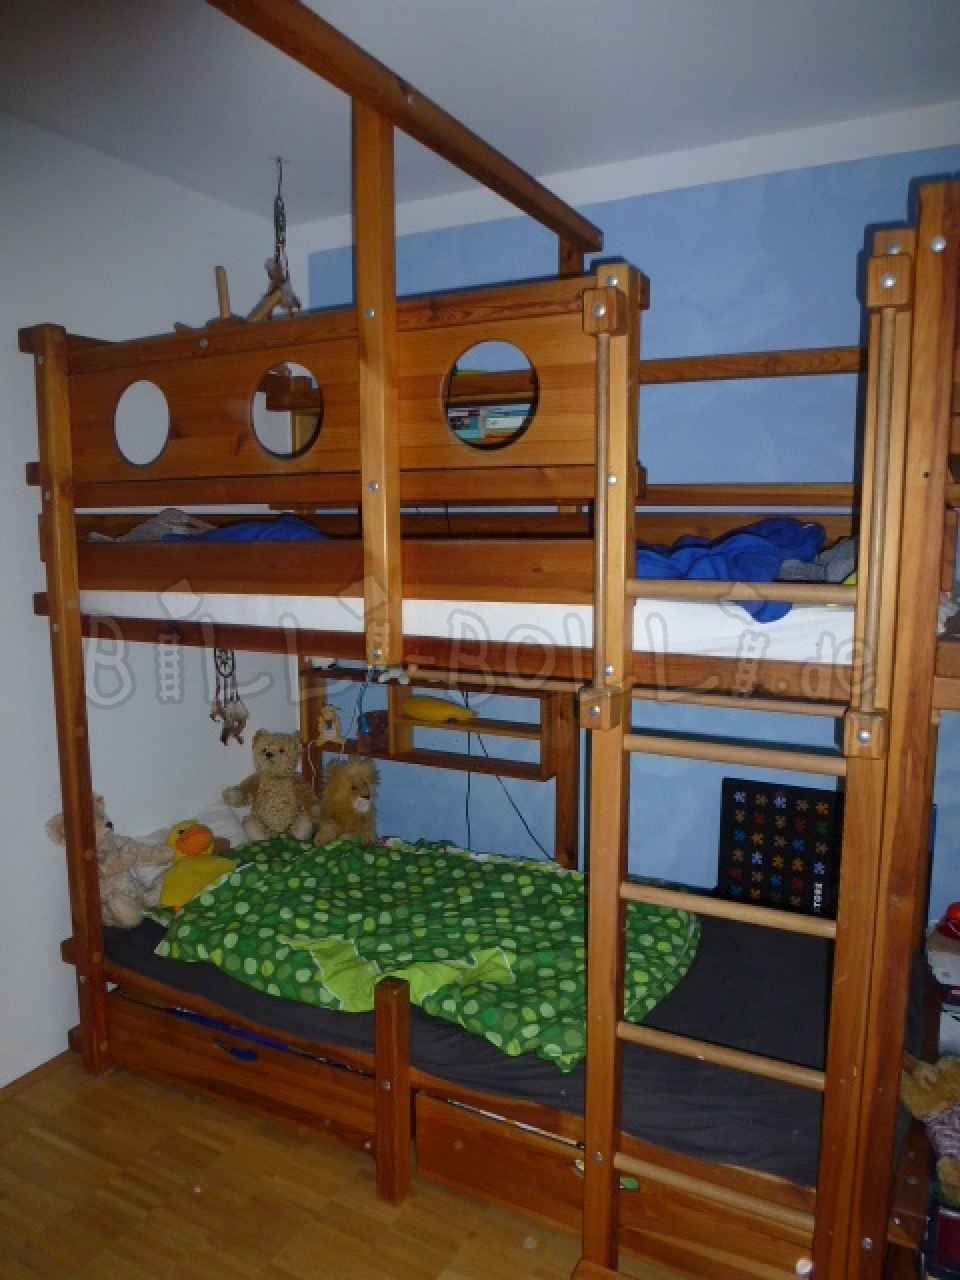 Billi-Bolli Adventure Bed (Category: second hand bunk bed)